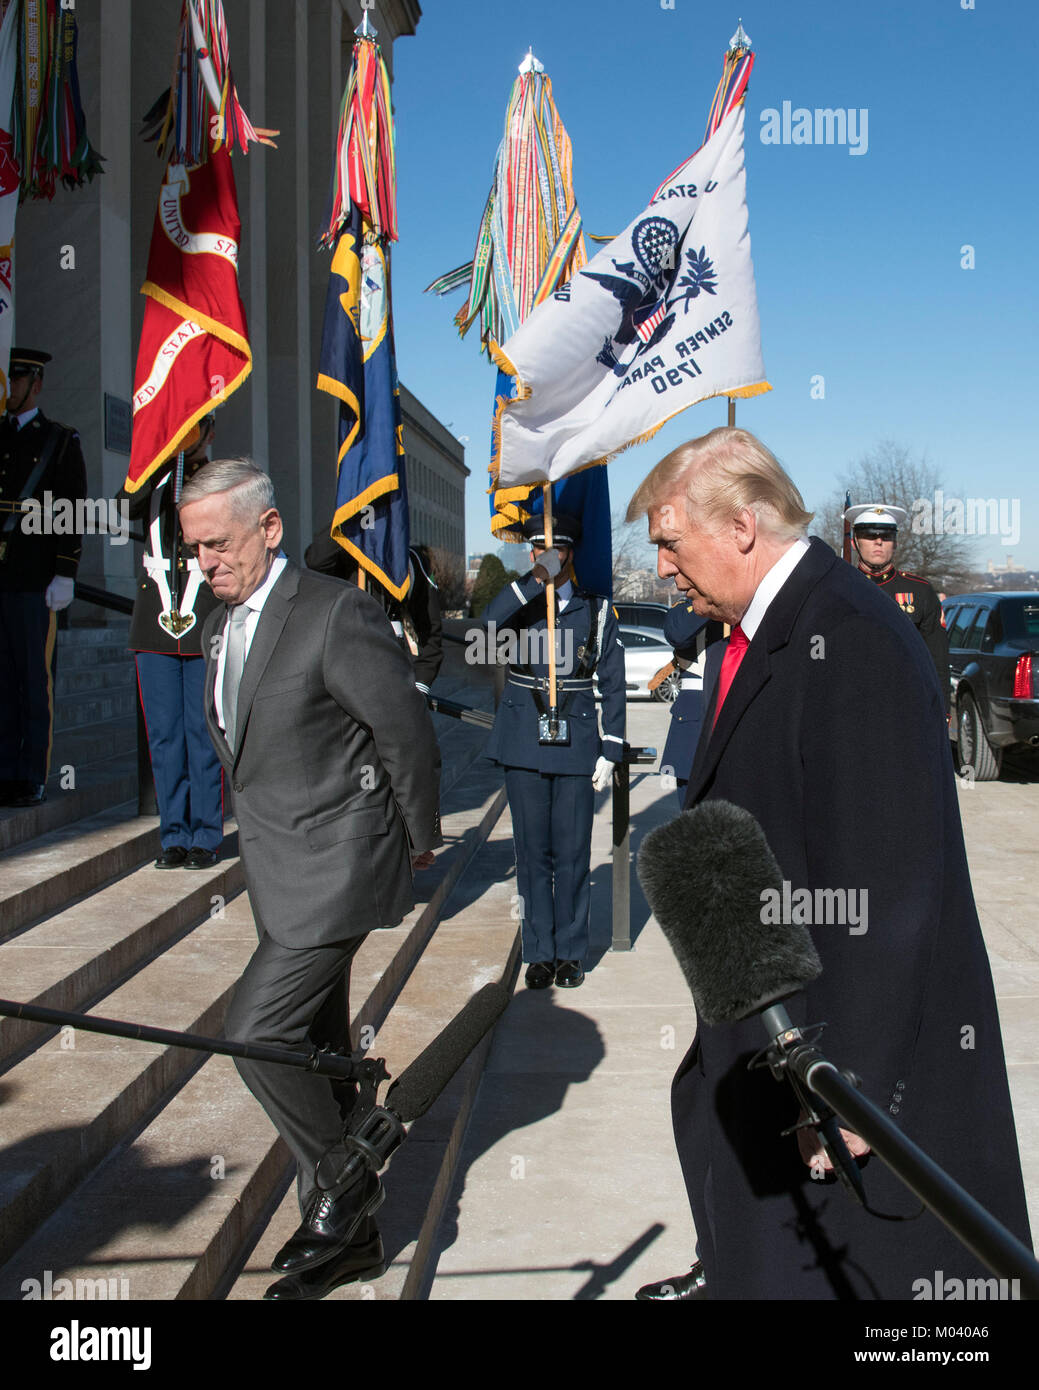 United States President Donald J. Trump, accompanied by US Secretary of Defense Jim Mattis, left, walks up the steps into the Pentagon after making a statement in Washington, DC on Thursday, January 18, 2018. Credit: Ron Sachs/Pool via CNP /MediaPunch Stock Photo